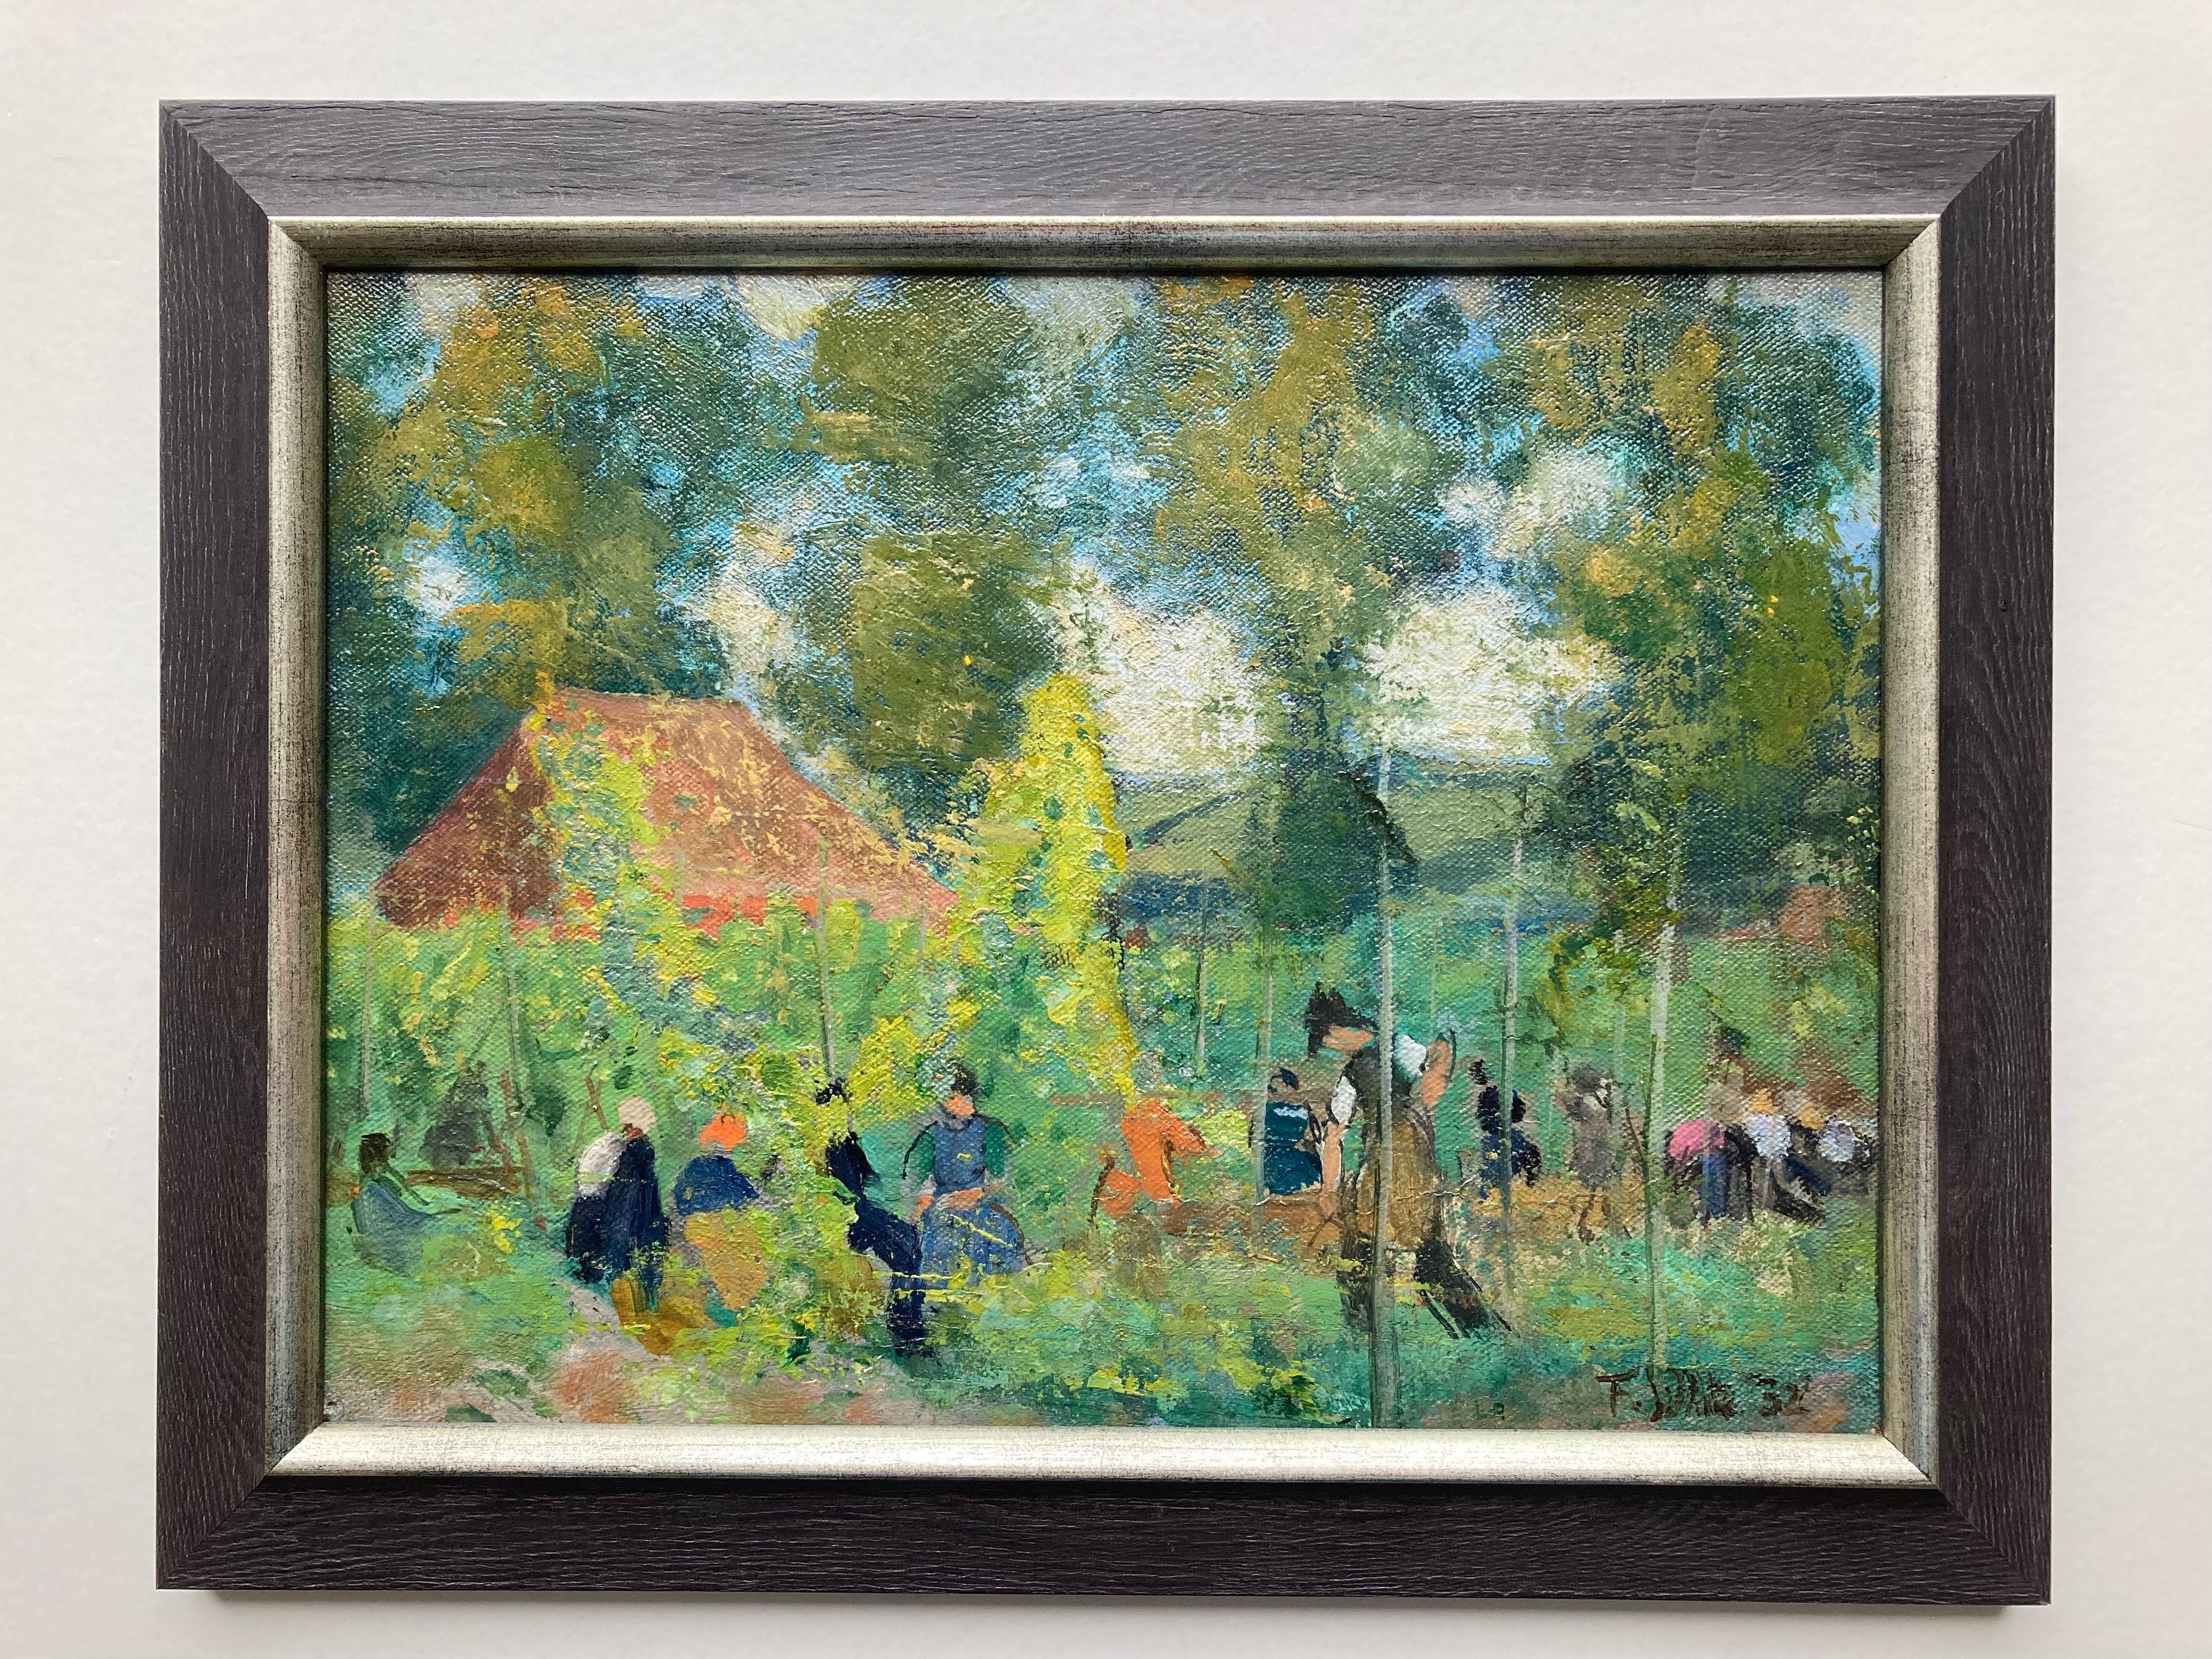 A wonderful image of hop pickers in the Kentish countryside, Southern England.

Franklin White (1892-1975)
Hope pickers
Signed and dated (19)32
Oil on canvas laid on board
9 x 12 inches unframed
12 x 15 inches with the frame

Frankin White